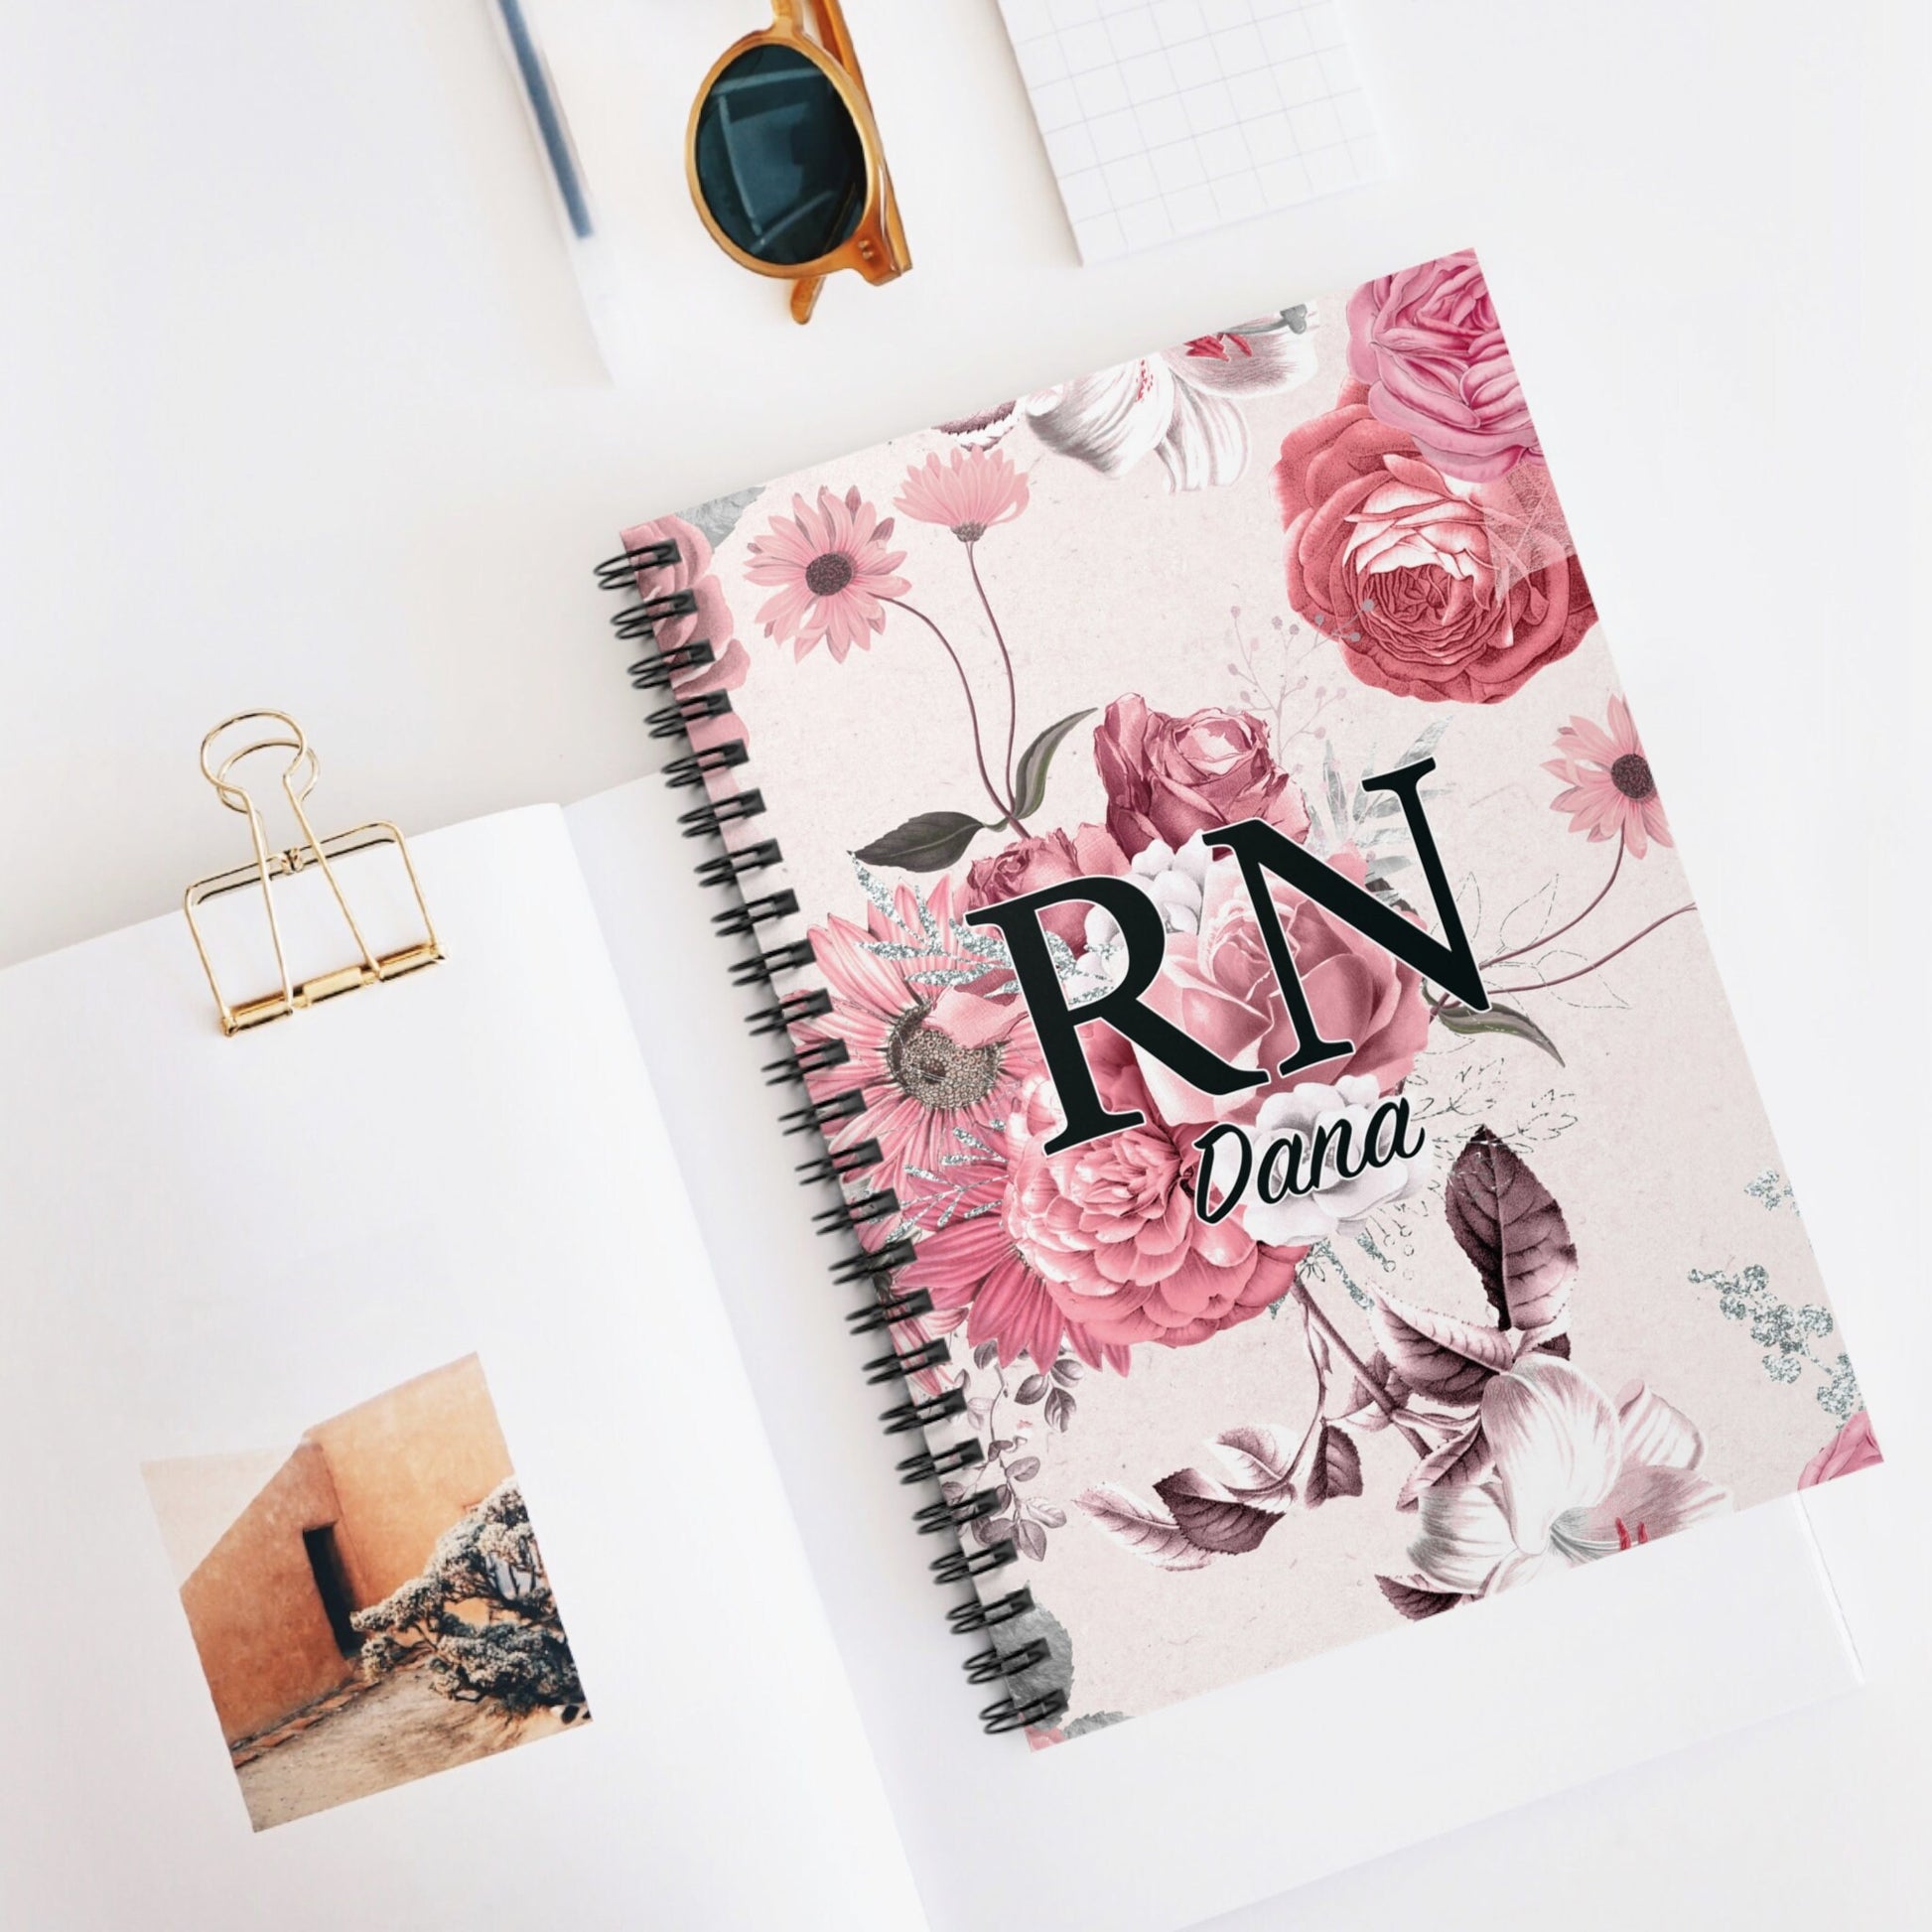 Registered Nurse Personalized Spiral Notebook - 8x6 Inch Lined Paper - Gift for Nurse